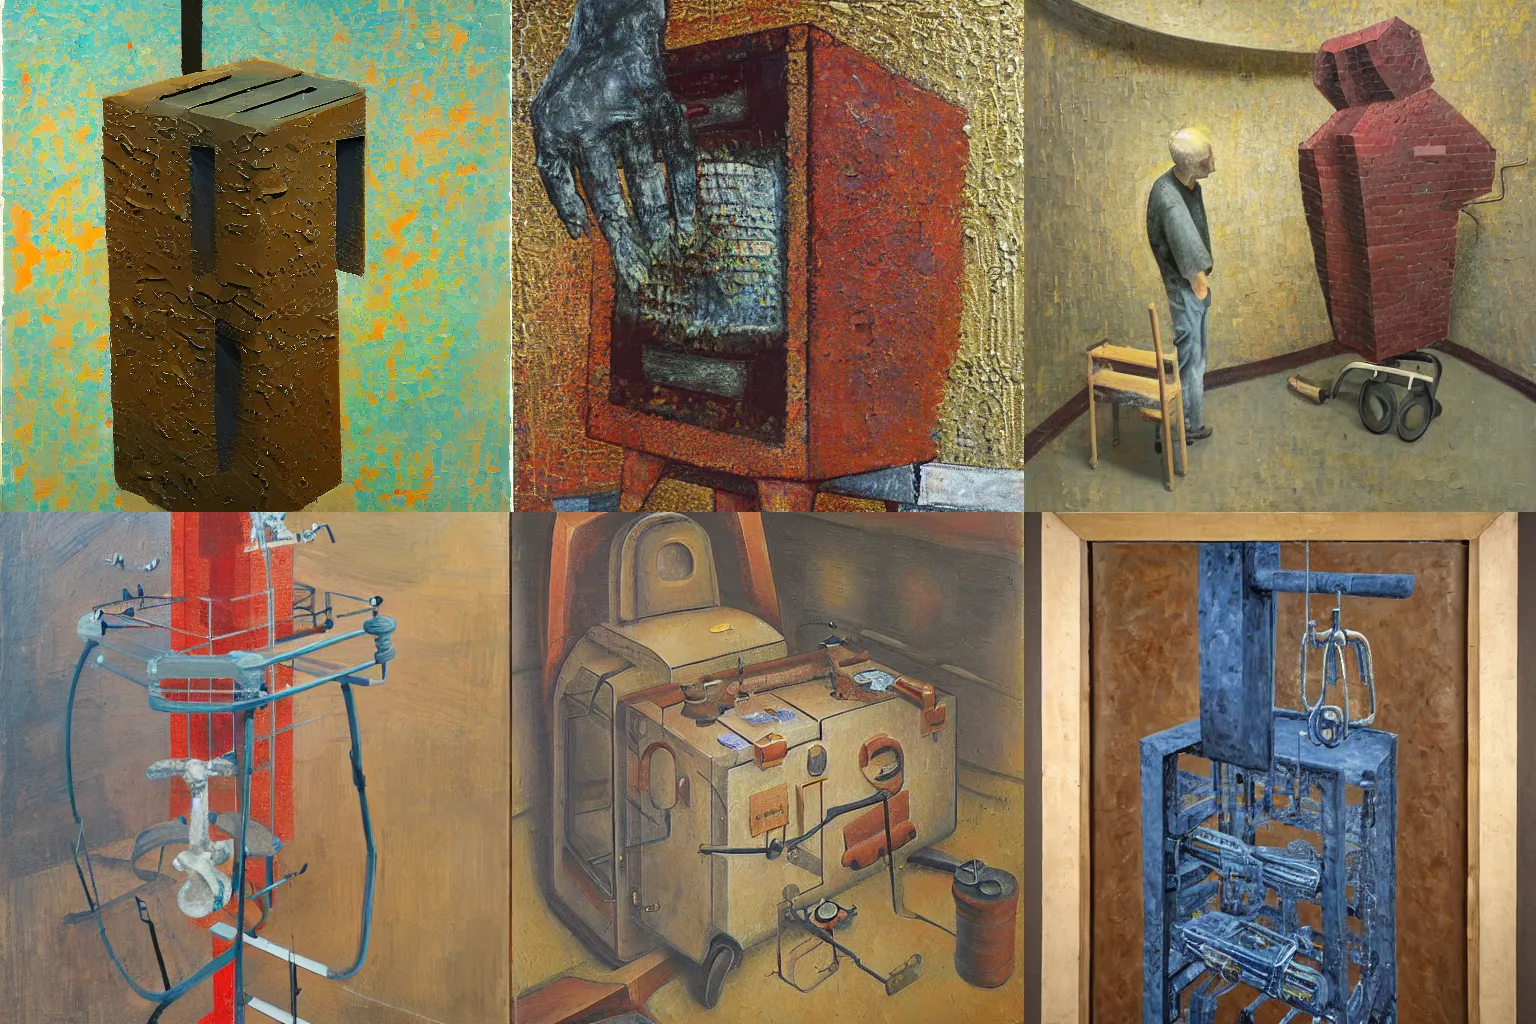 Prompt: a detailed, impasto painting by shaun tan and louise bourgeois of an abstract forgotten sculpture by ivan seal and the caretaker, hospital machine